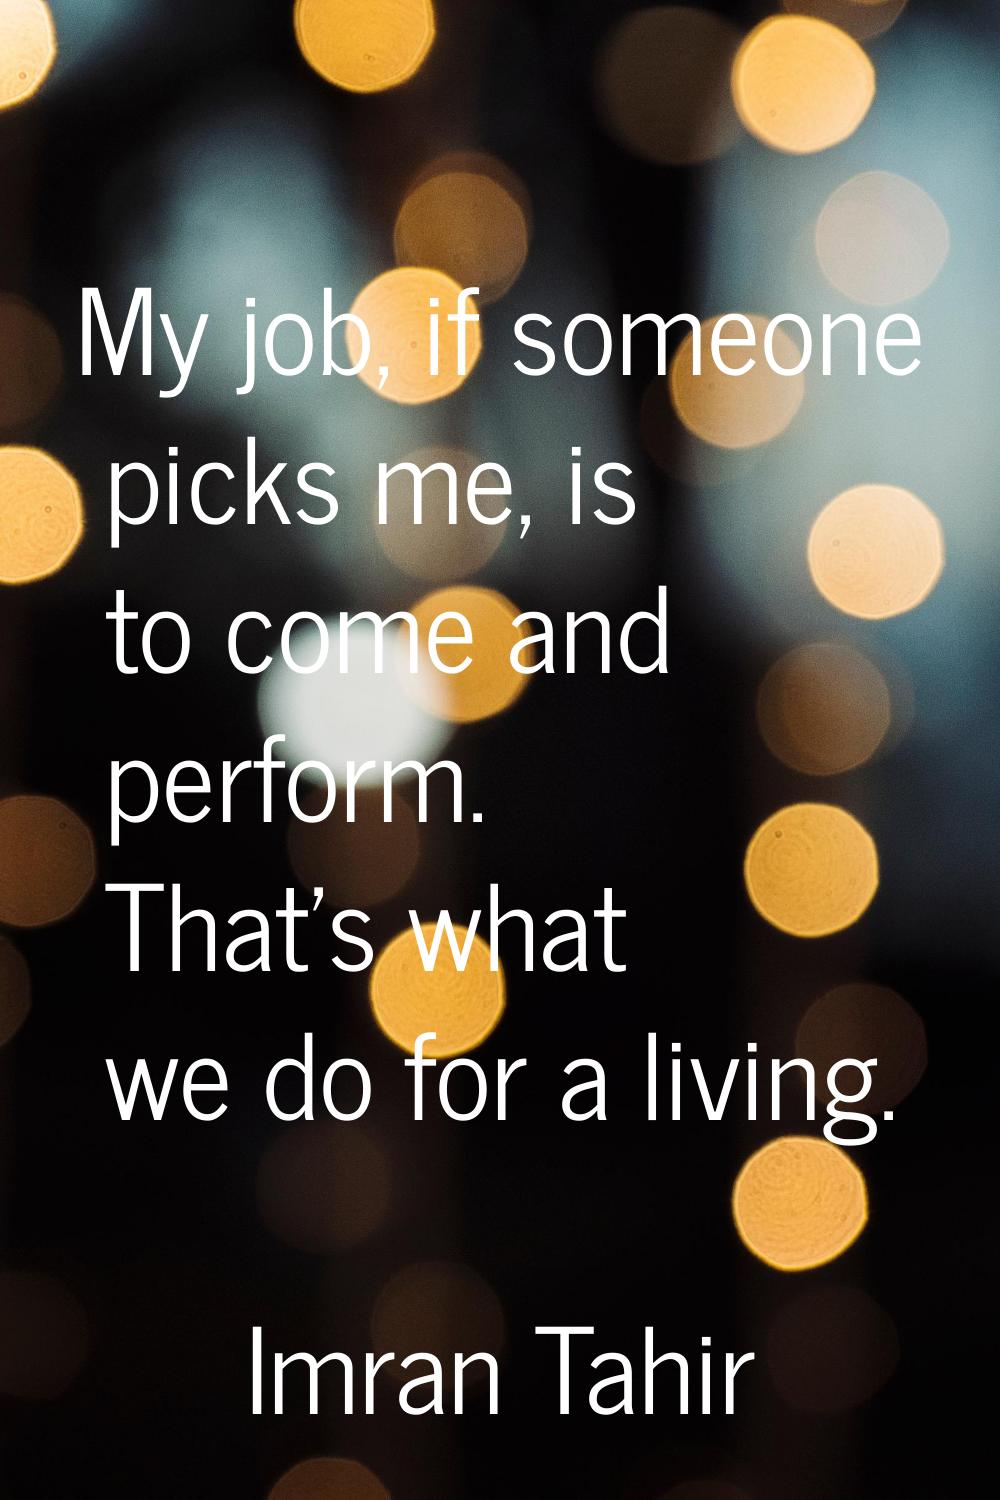 My job, if someone picks me, is to come and perform. That's what we do for a living.